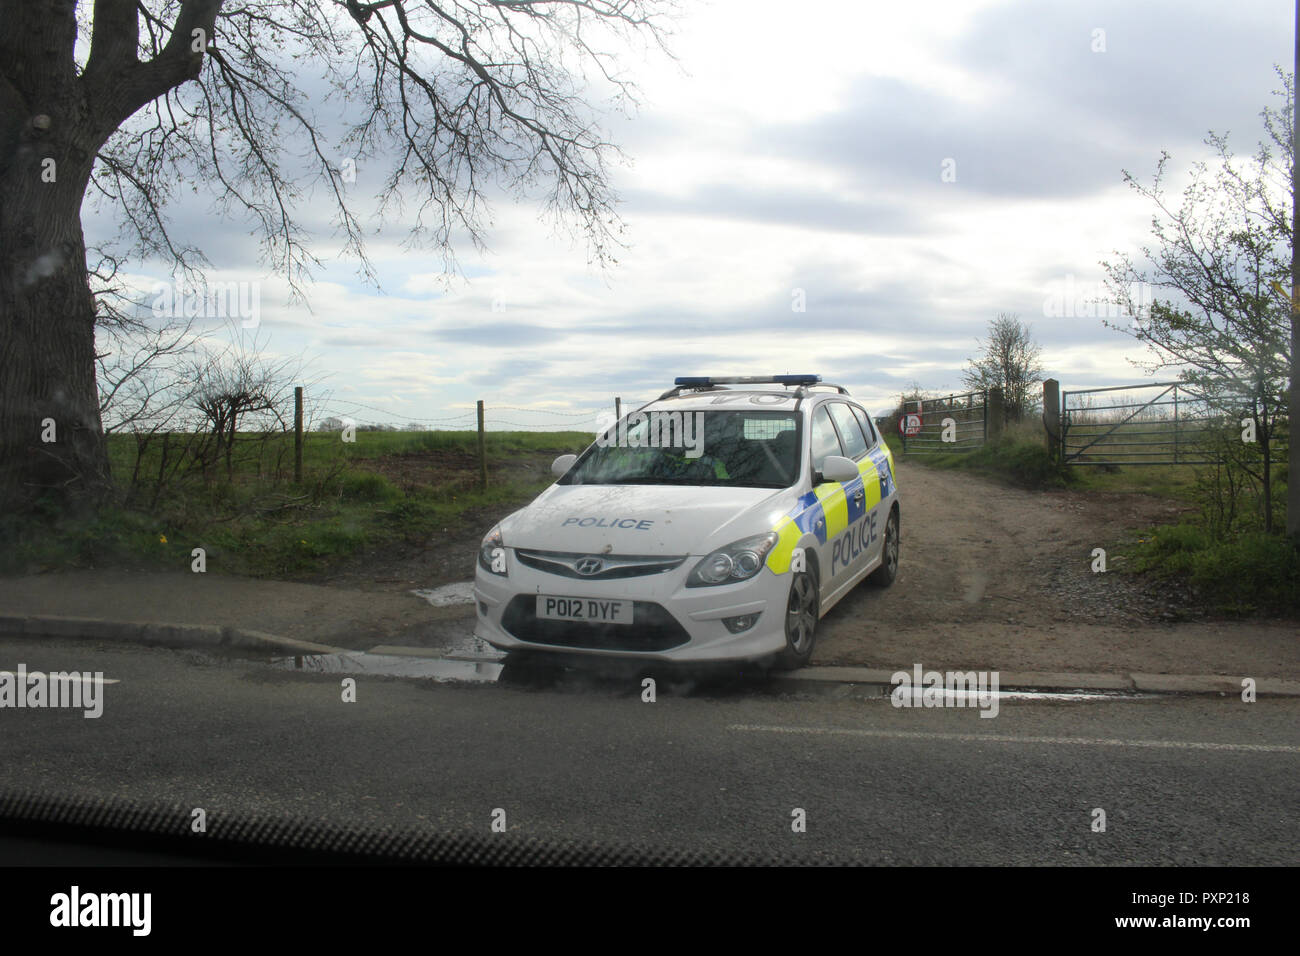 Police Car at Fracking Site Stock Photo